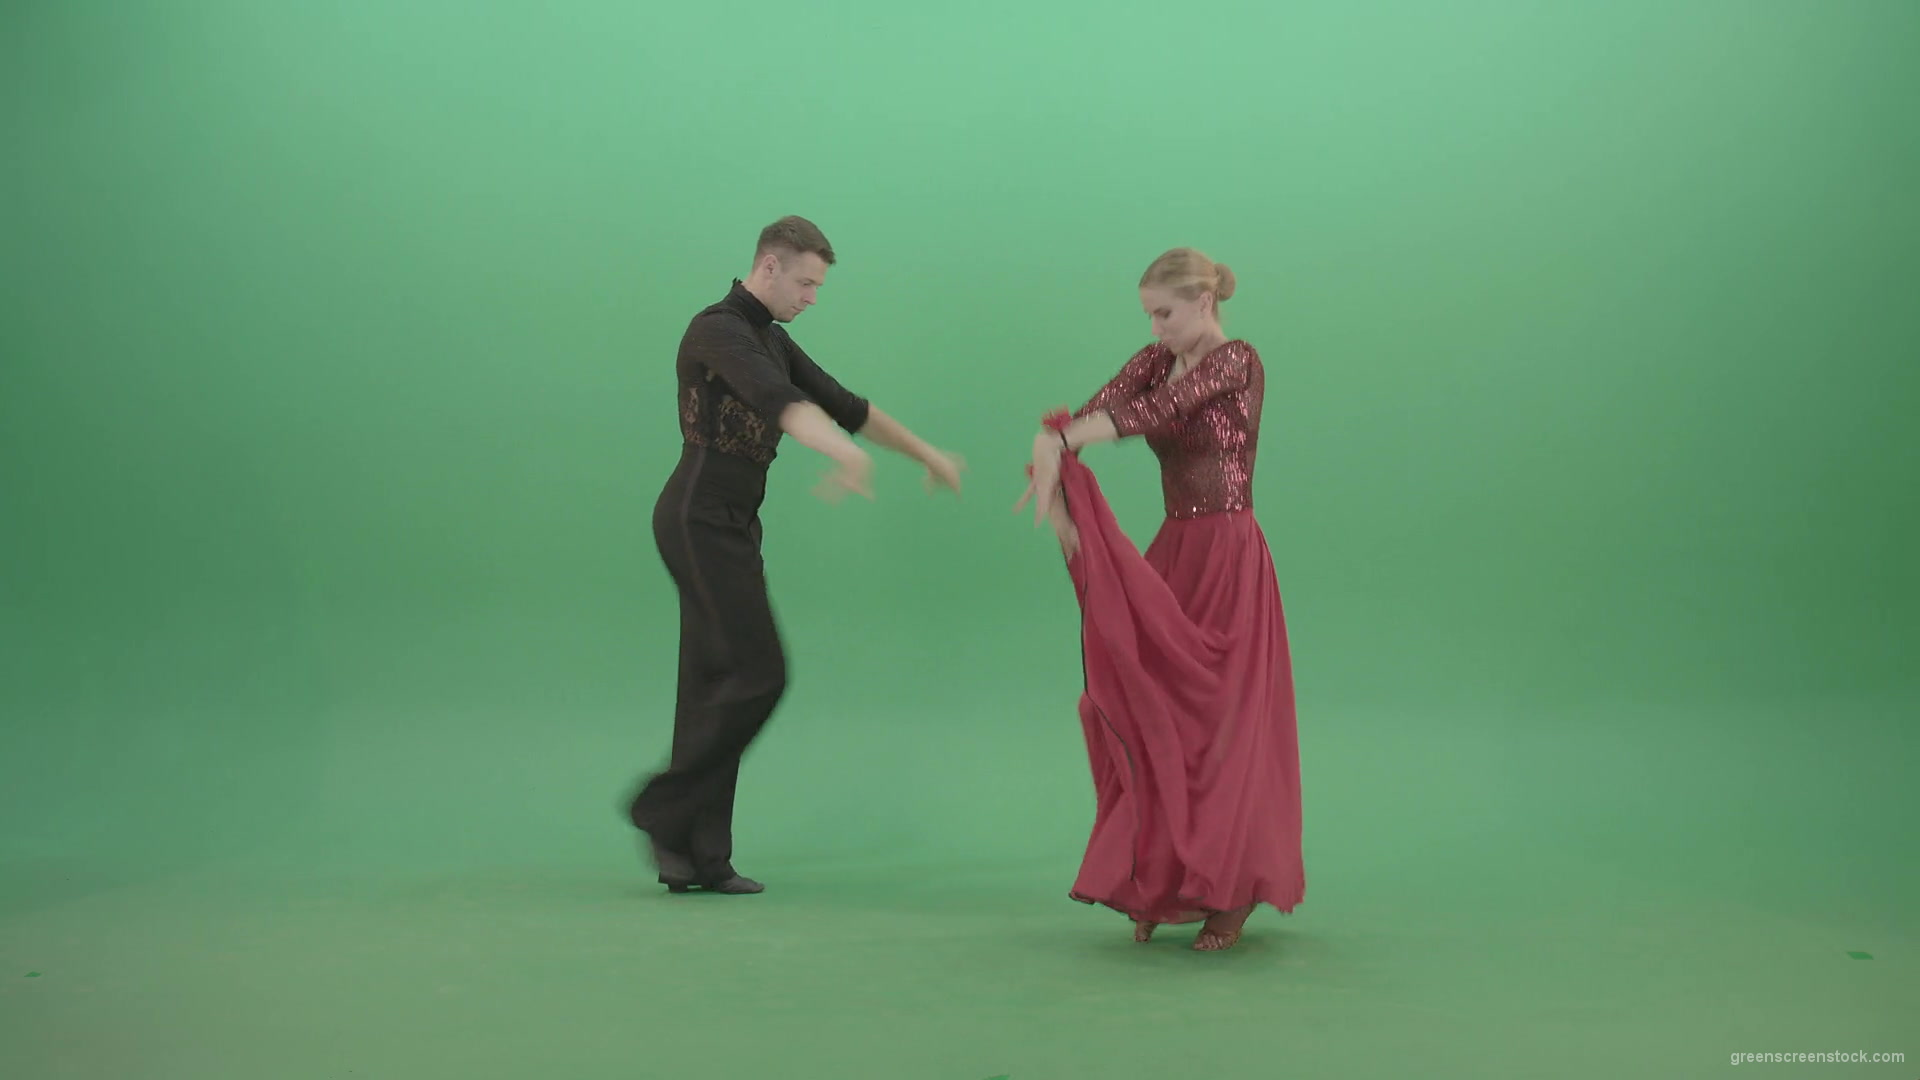 Passion-latino-ballroom-dance-by-lovely-couple-man-and-girl-isolated-on-green-screen-4K-Video-Footage-1920_007 Green Screen Stock